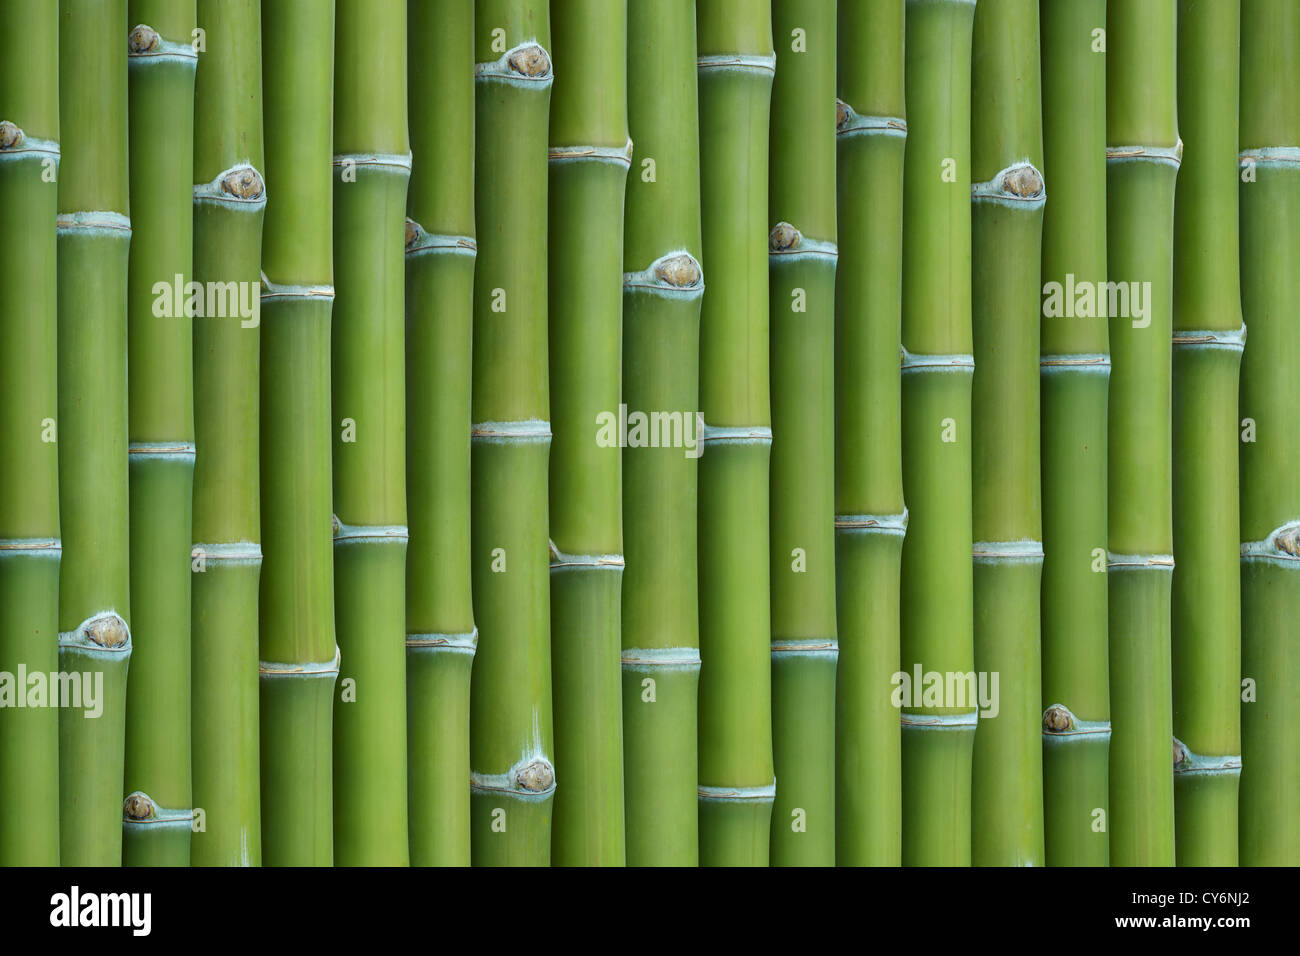 bamboo sticks in a row as background Stock Photo